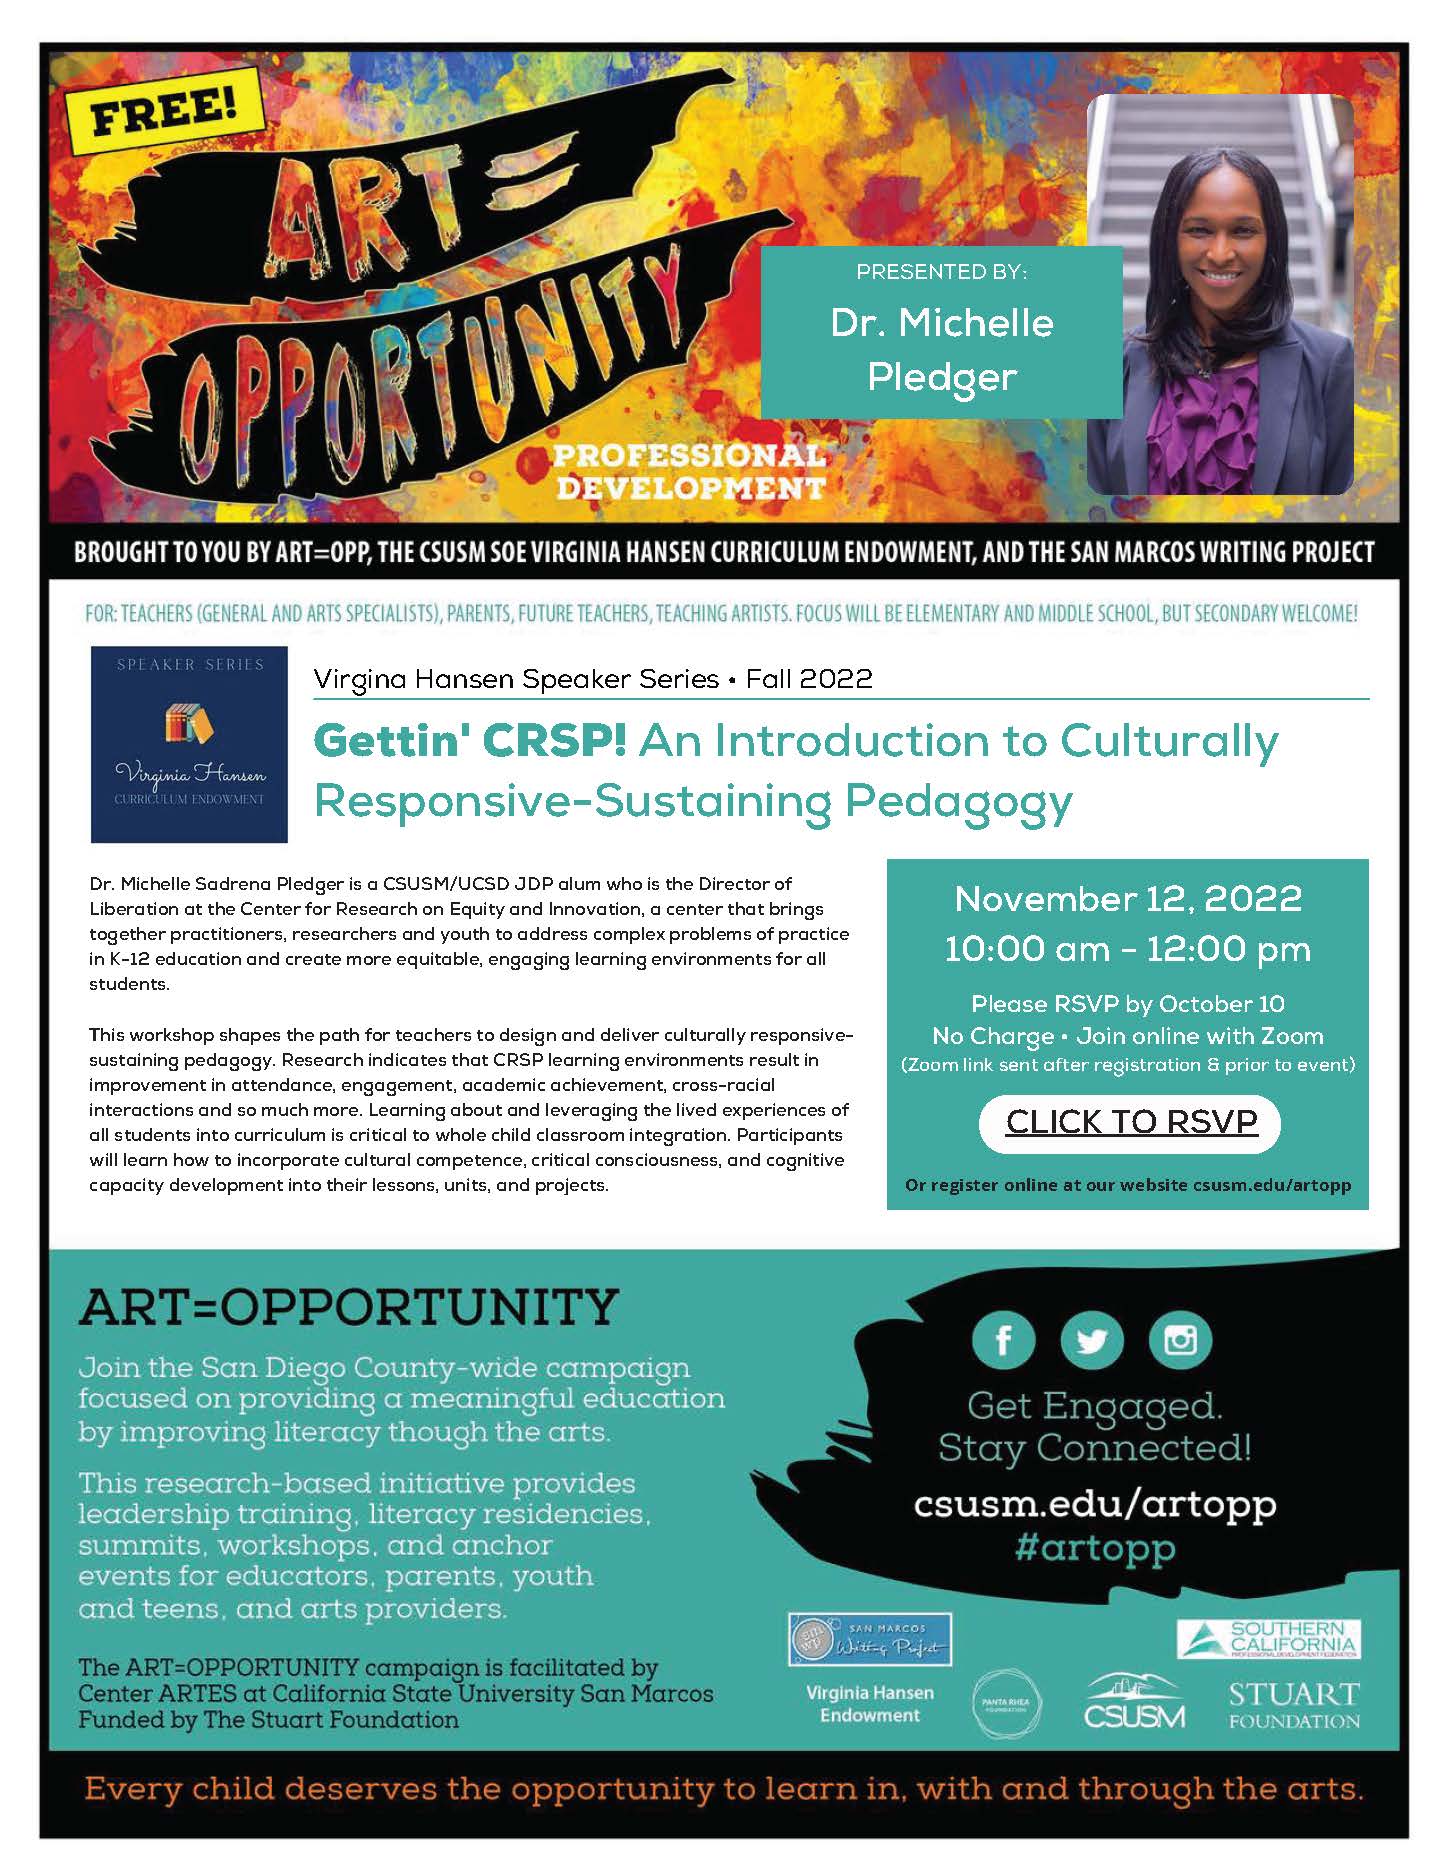 image of event flyer for Gettin' CRSP! An Introduction to Culturally Responsive-Sustaining Pedagogy